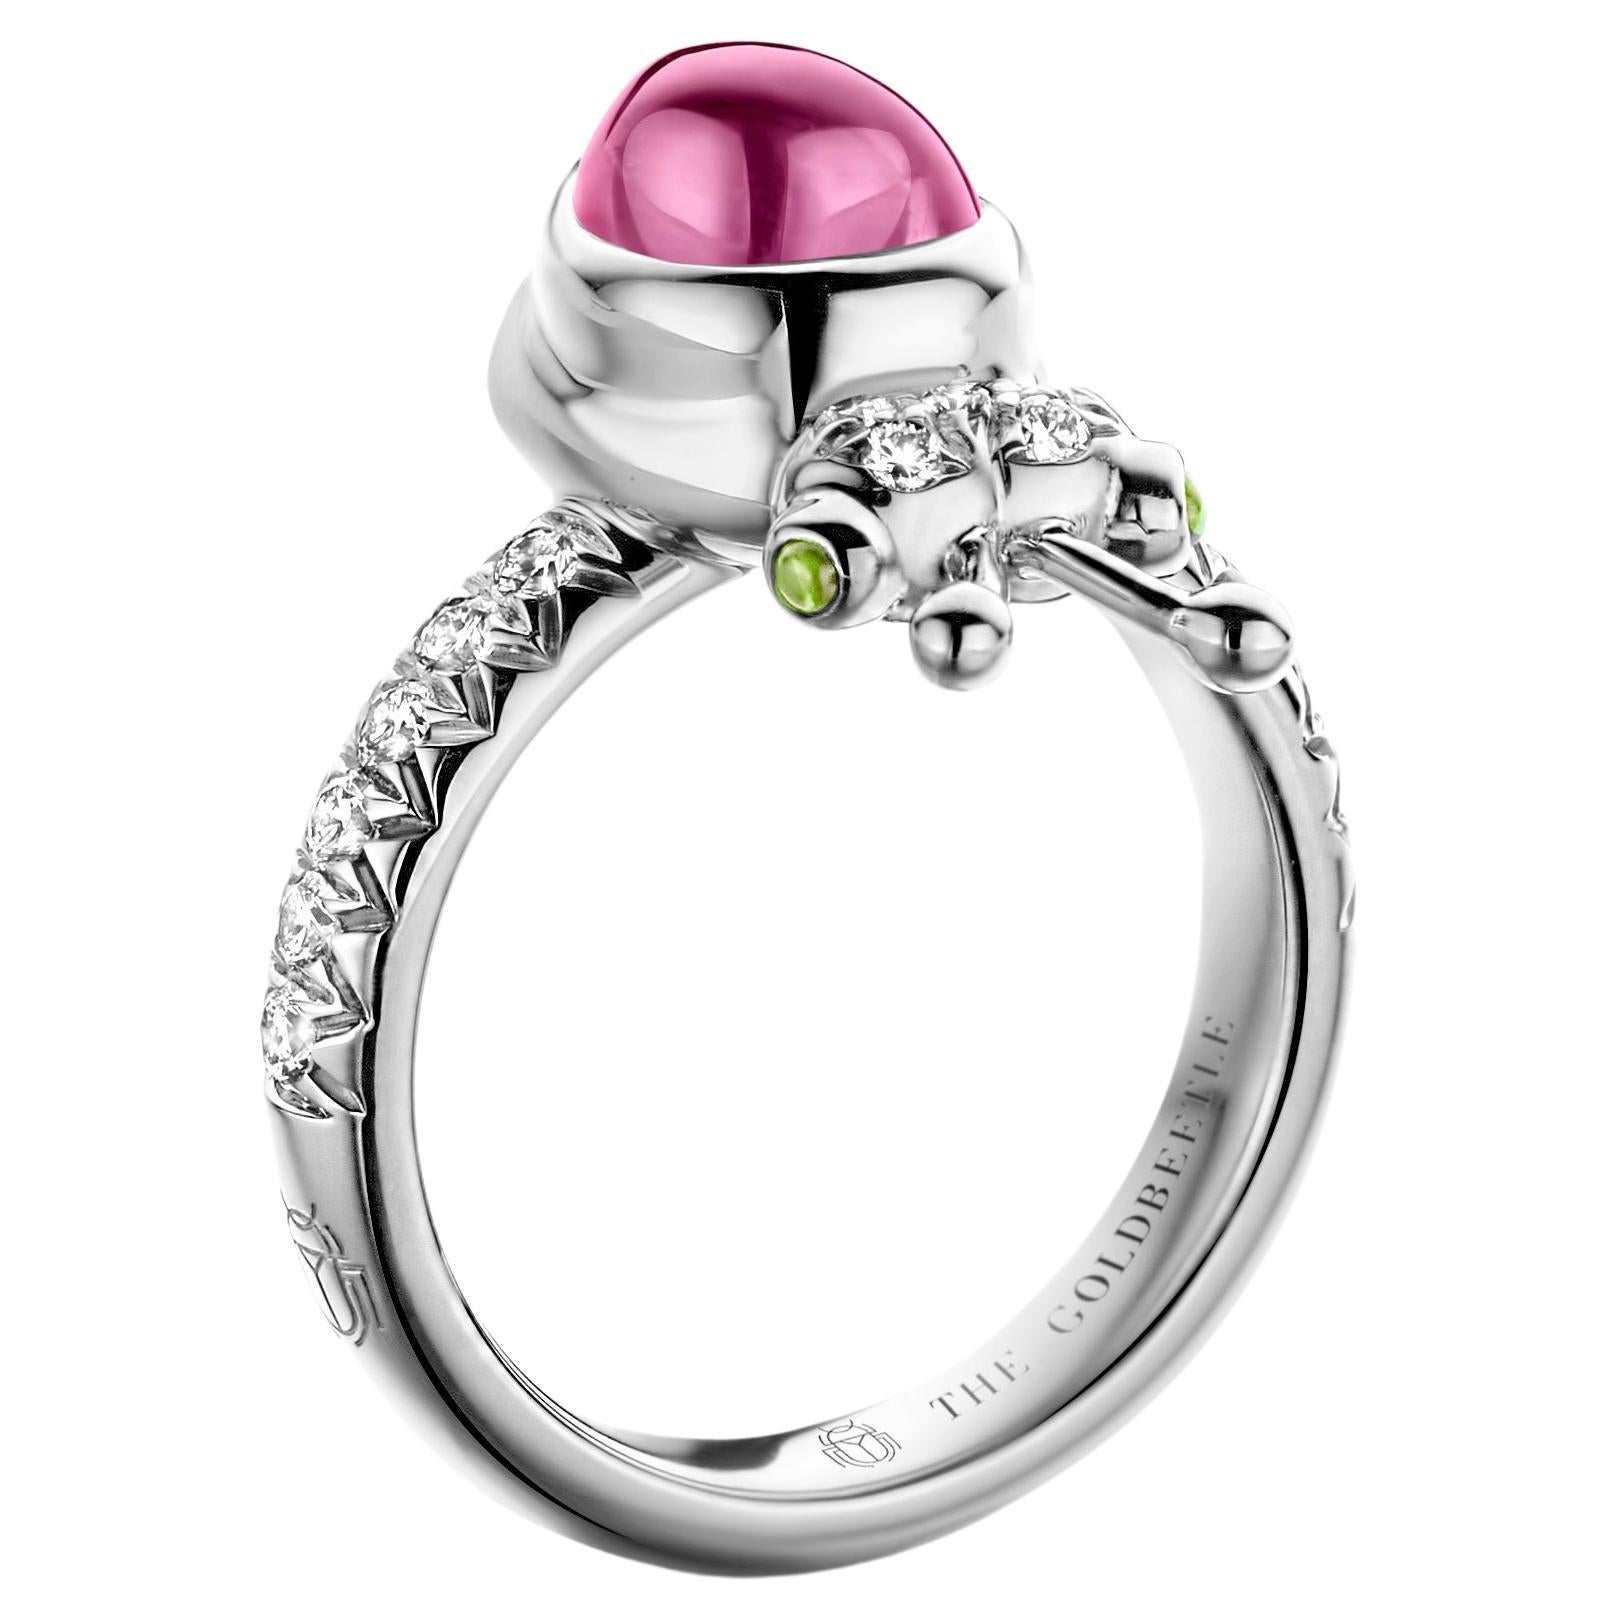 One-of-a-kind lucky beetle ring in 18 Karat white gold 8,6 g set with the finest diamonds in brilliant cut 0,34 Carat (VVS/DEF quality) one natural, rhodolite garnet in pear cabochon cut and two tsavorites in round cabochon cut.
